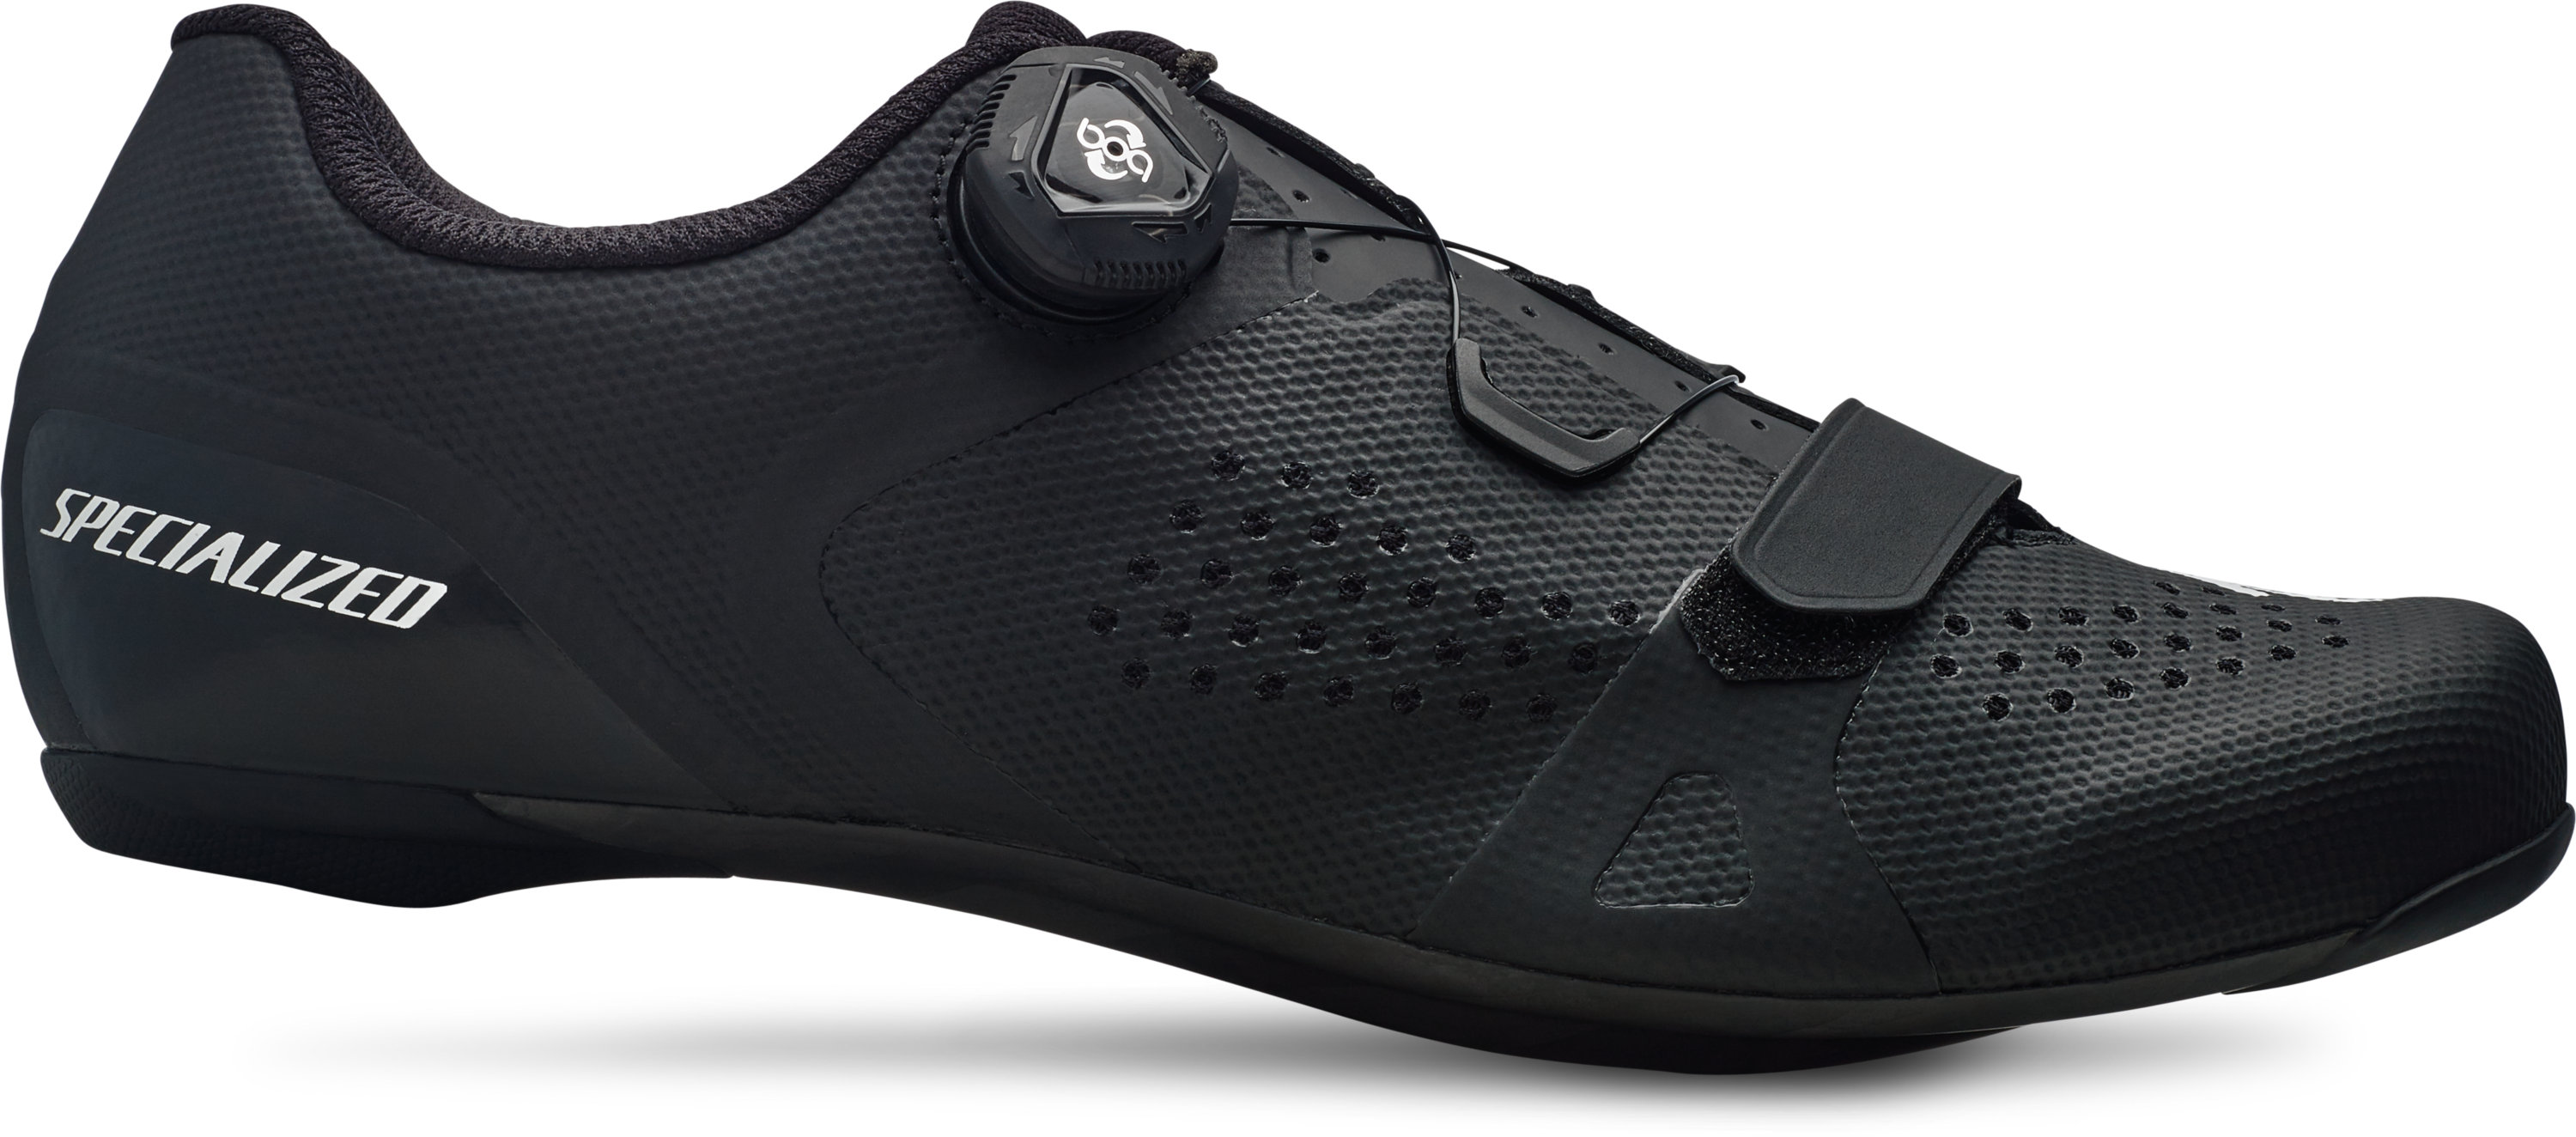 torch 2.0 road shoes review